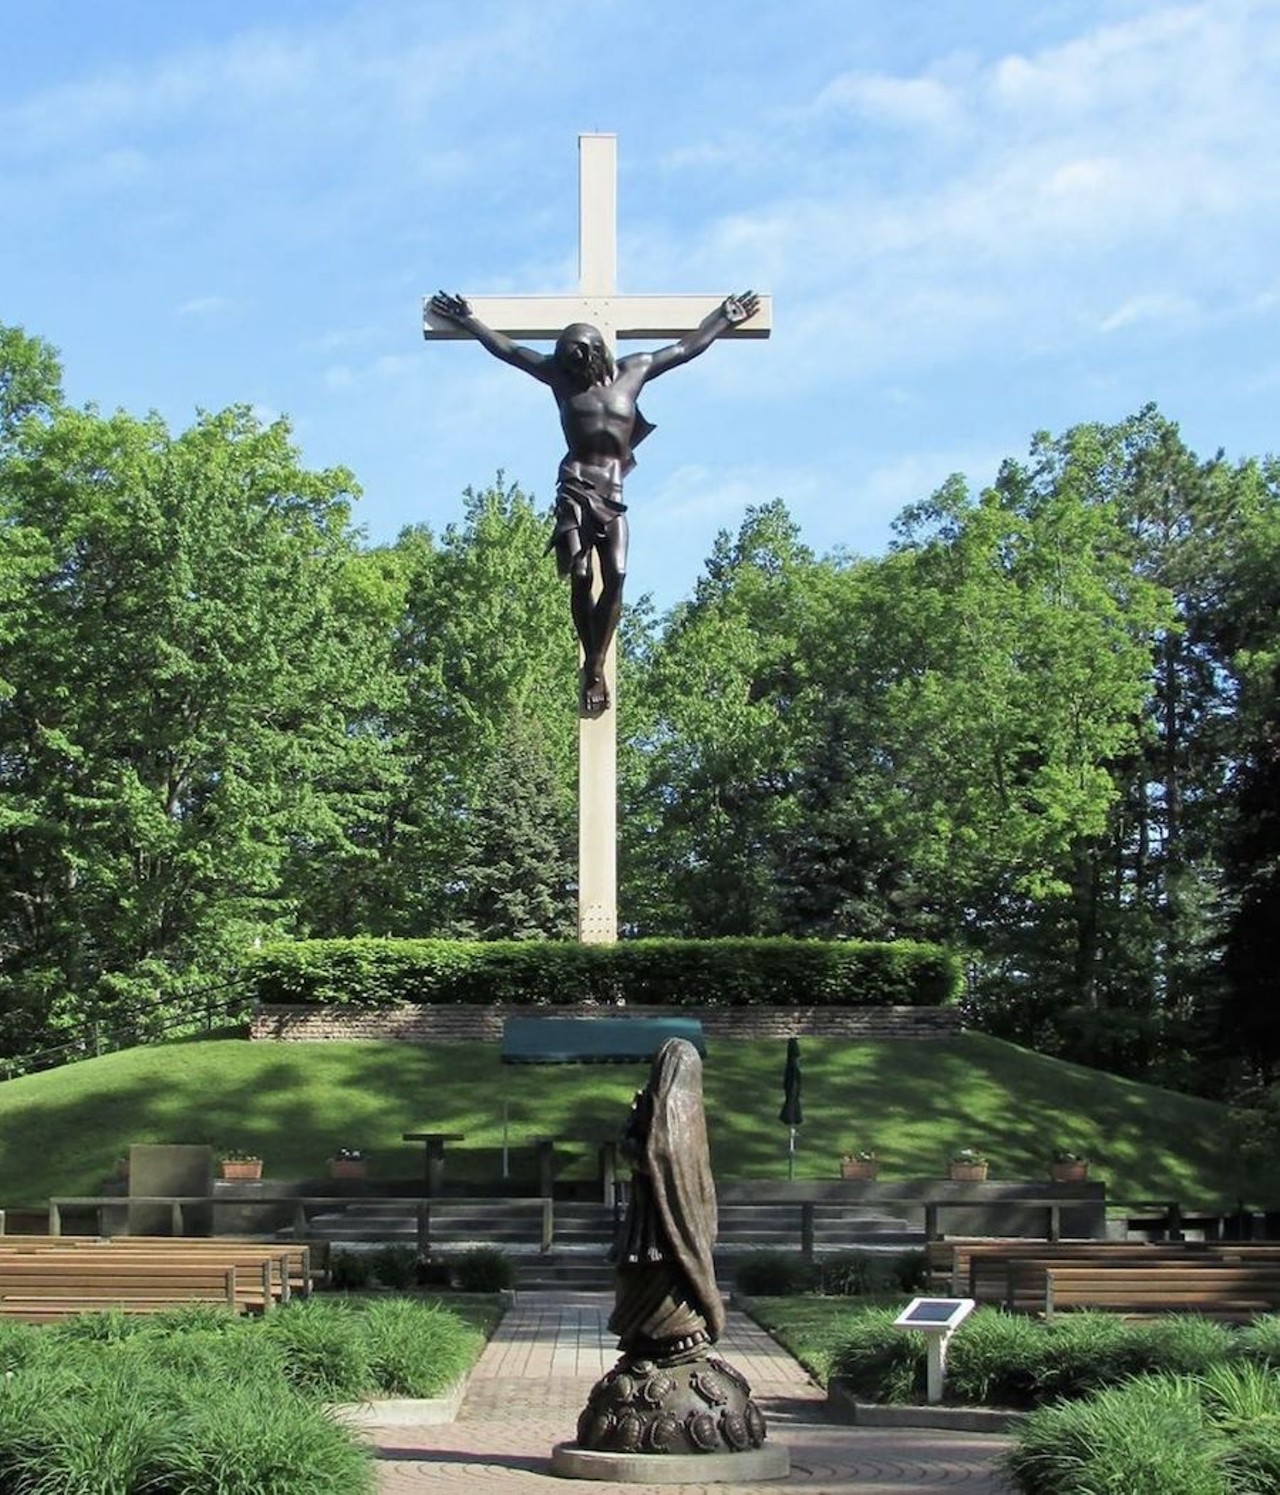 World&#146;s Largest Crucifix
7078 W. M68 Hwy., Indian River; crossinthewoods.com
As you&#146;re traveling through northern Michigan, you can see the world&#146;s largest crucifix located just off M-68 in Indian River. Weighing almost seven tons and standing at 30 feet tall, this statue was declared a national shrine by the United Conference of Catholic Bishops in 2006. Annually, this shrine is visited by about 300,000 people, along with with a Holy Staircase leading people through the forest to the shrine.
Photo via National Shrine of Cross in the Woods / Facebook